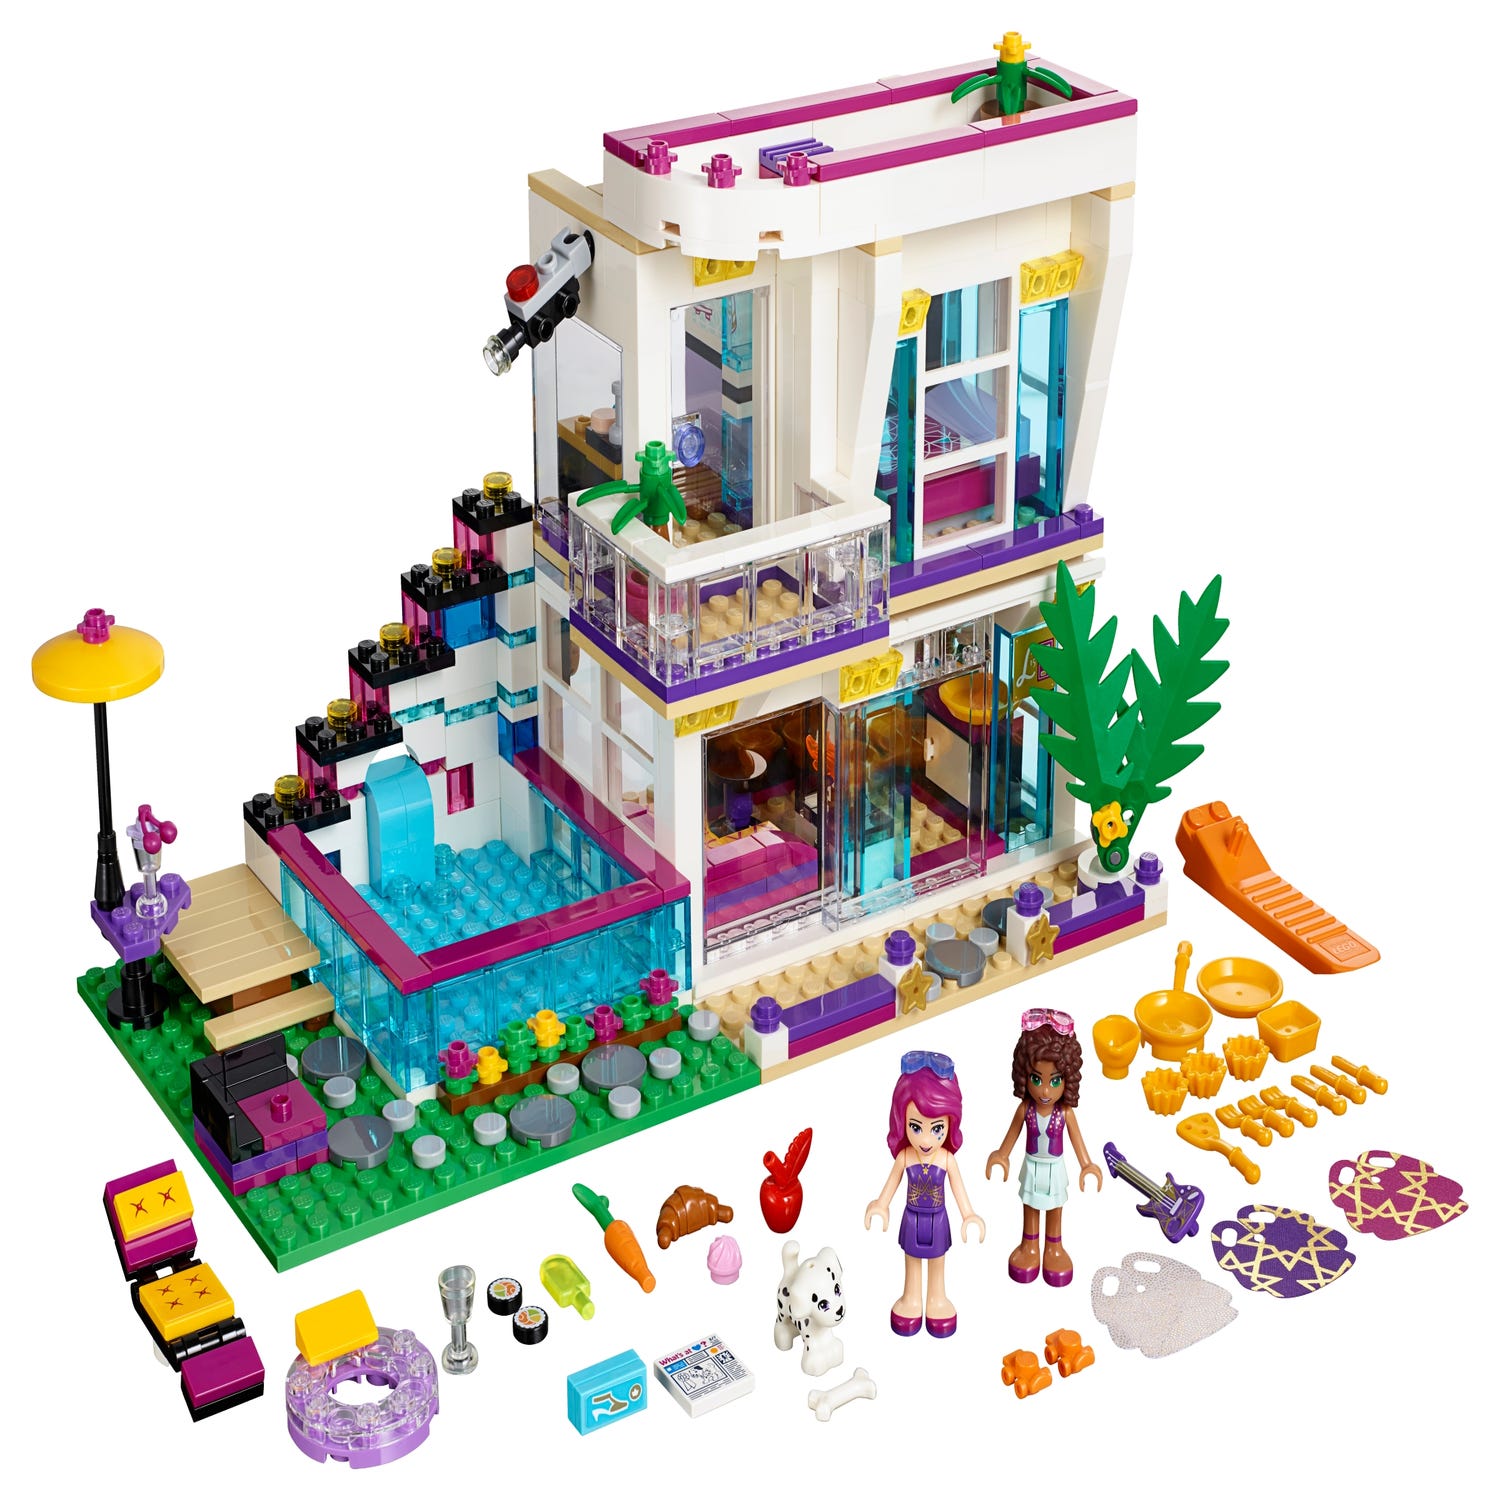 Mansion Lego Friends House | peacecommission.kdsg.gov.ng